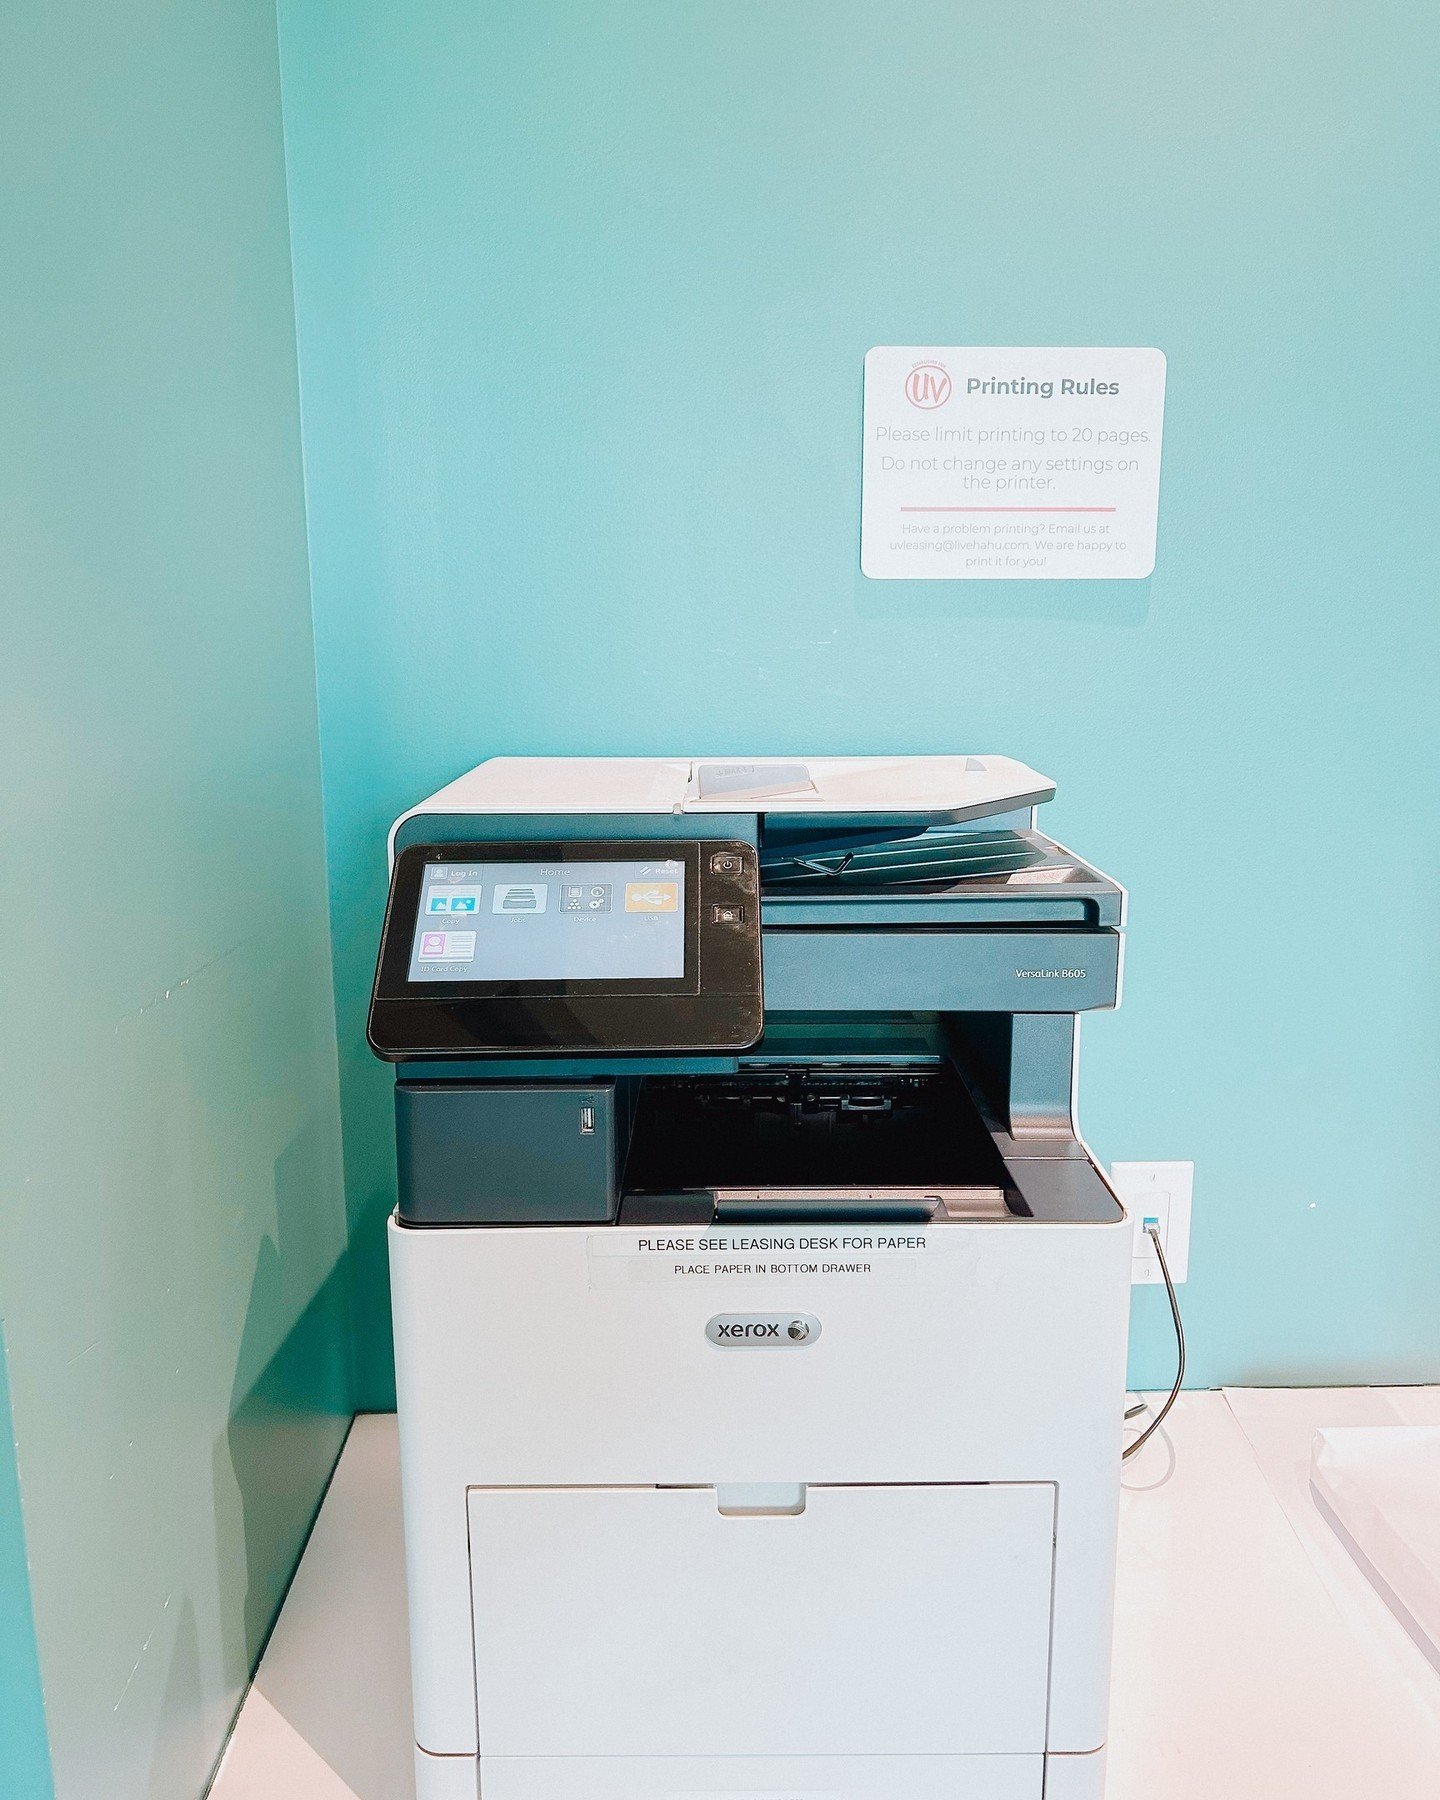 Did you know that we offer free printing in our Resident Life Center? 👀 🖨️

The printer is located upstairs in our study lounge. Please ask the front desk for paper if the printer is out!